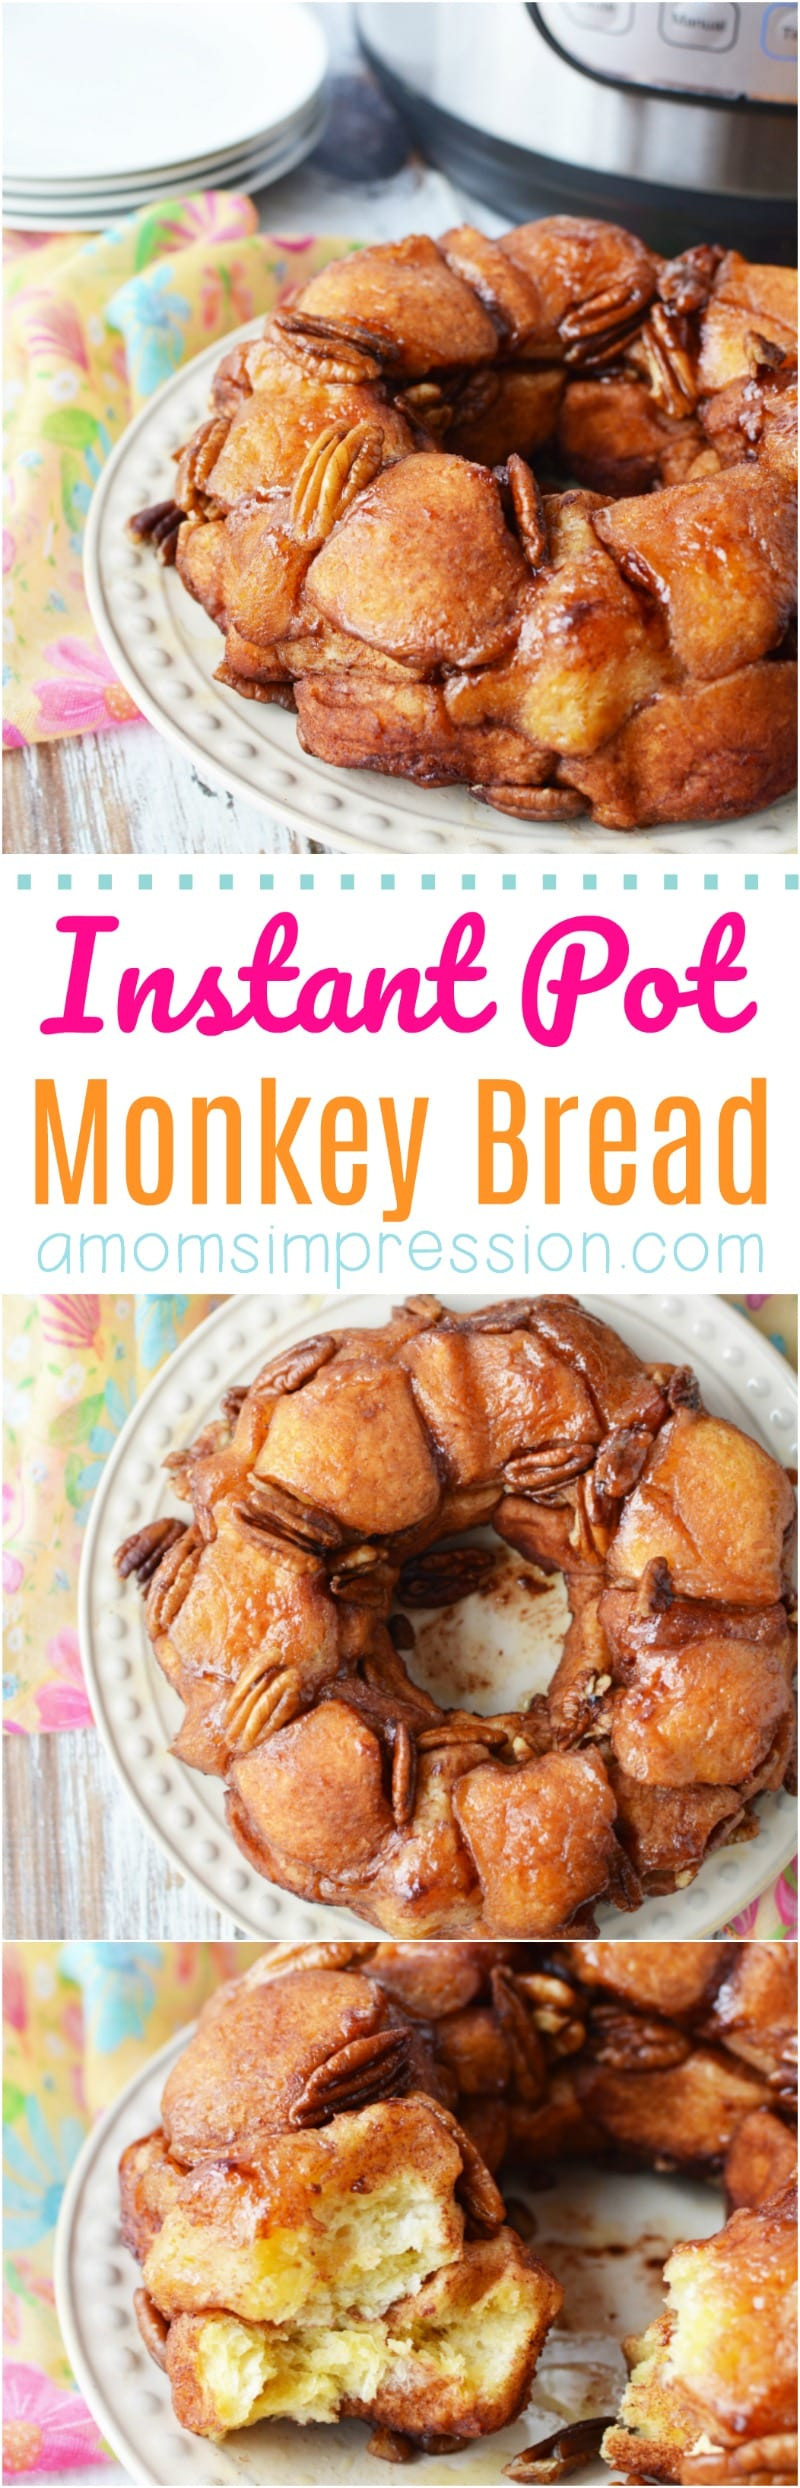 Quick And Easy Monkey Bread Recipes
 Easy Instant Pot Monkey Bread A Mom s Impression